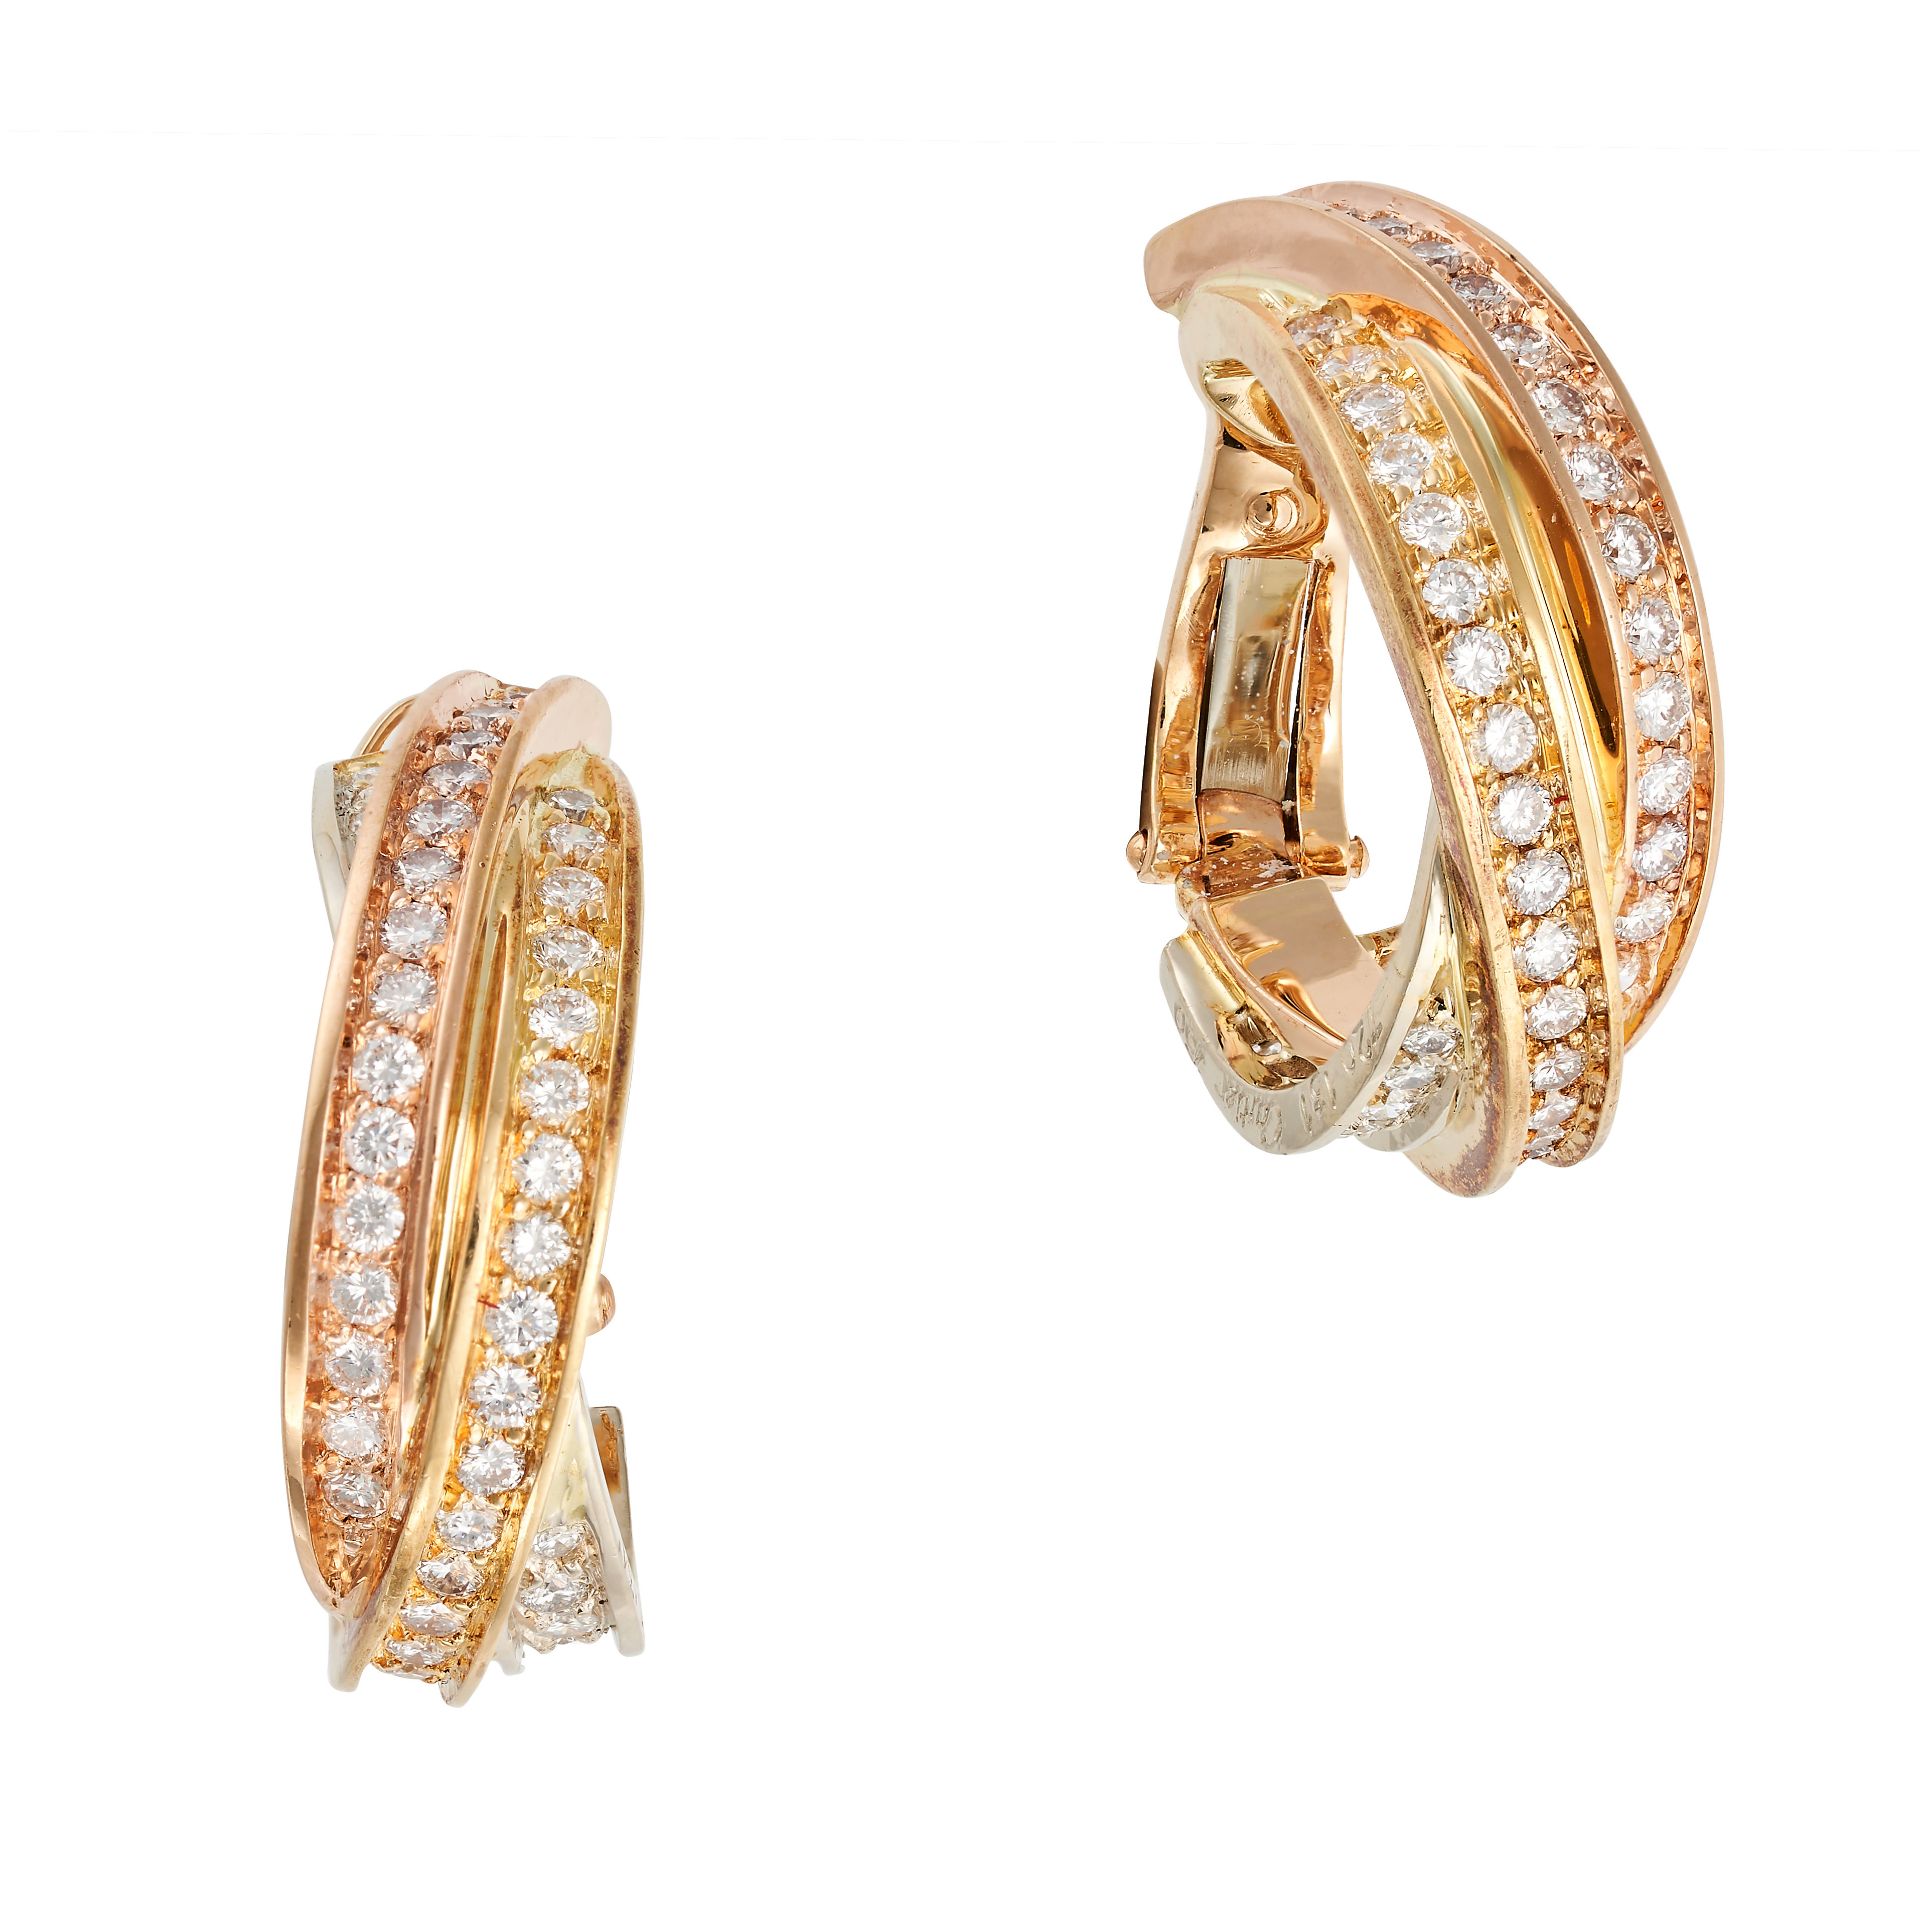 CARTIER, A PAIR OF DIAMOND TRINITY DE CARTIER HOOP EARRINGS in 18ct yellow, white and rose gold, ... - Bild 2 aus 2